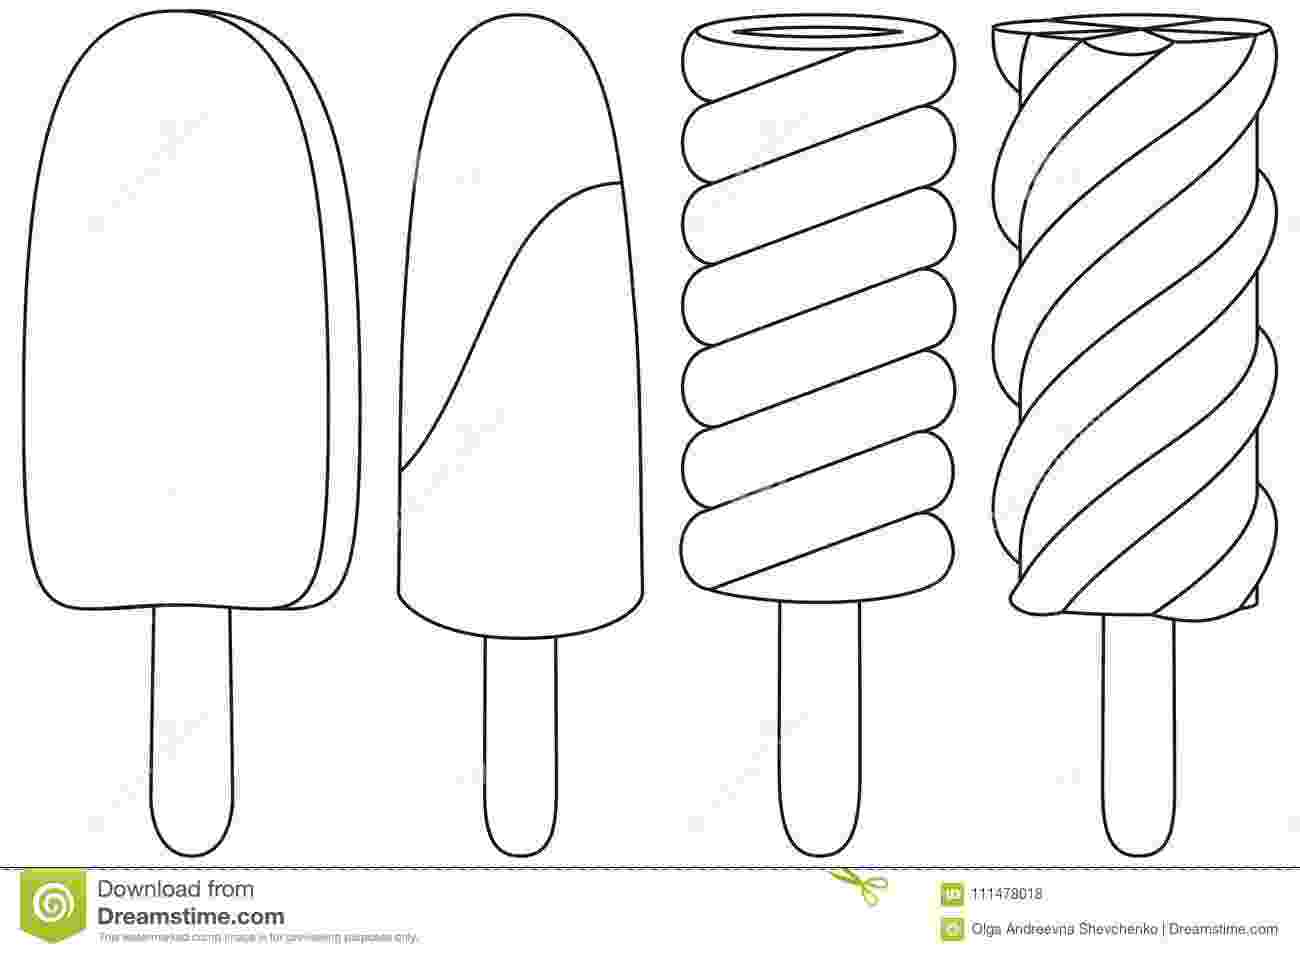 popsicle coloring page pin by linda frank on adult and children39s coloring pages popsicle page coloring 